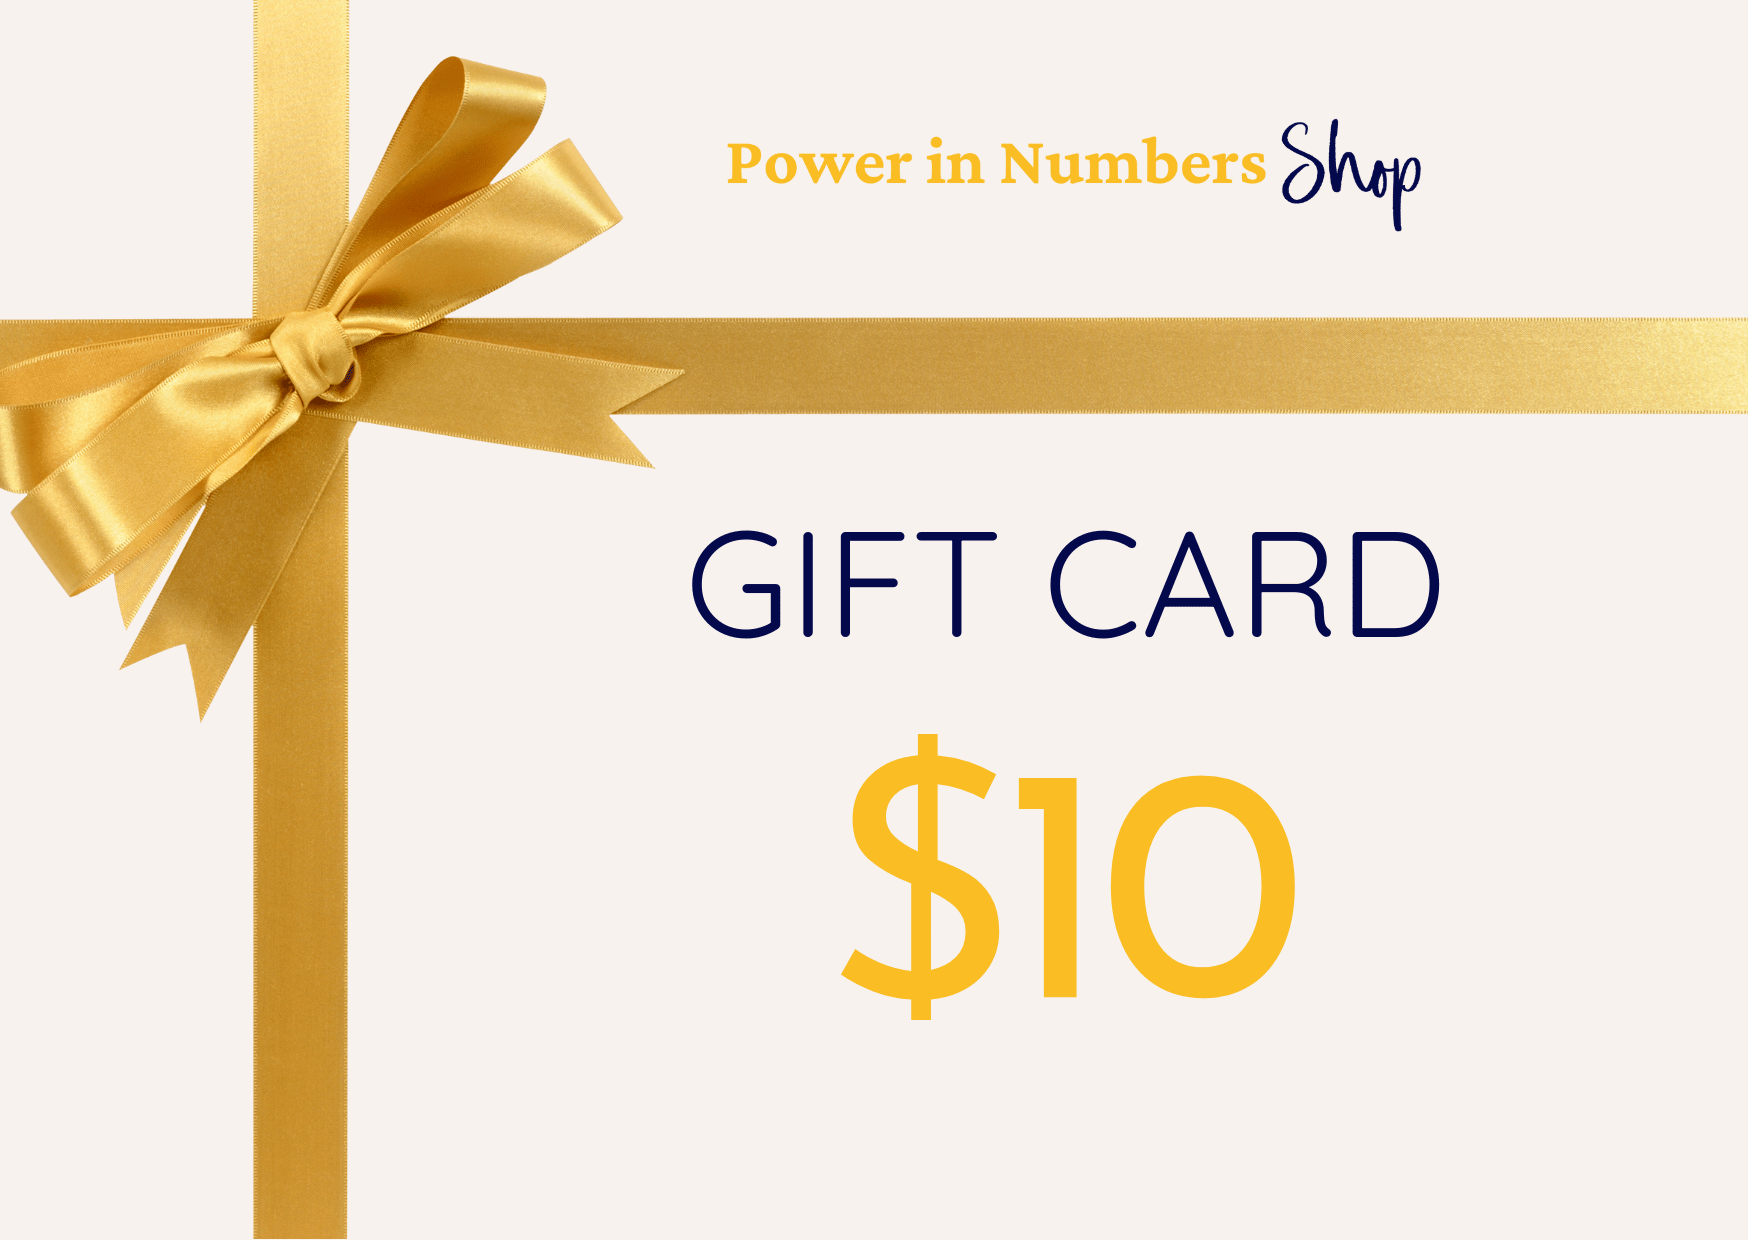 Gift Financial Literacy $10 gift card showcasing the importance of starting small in financial education